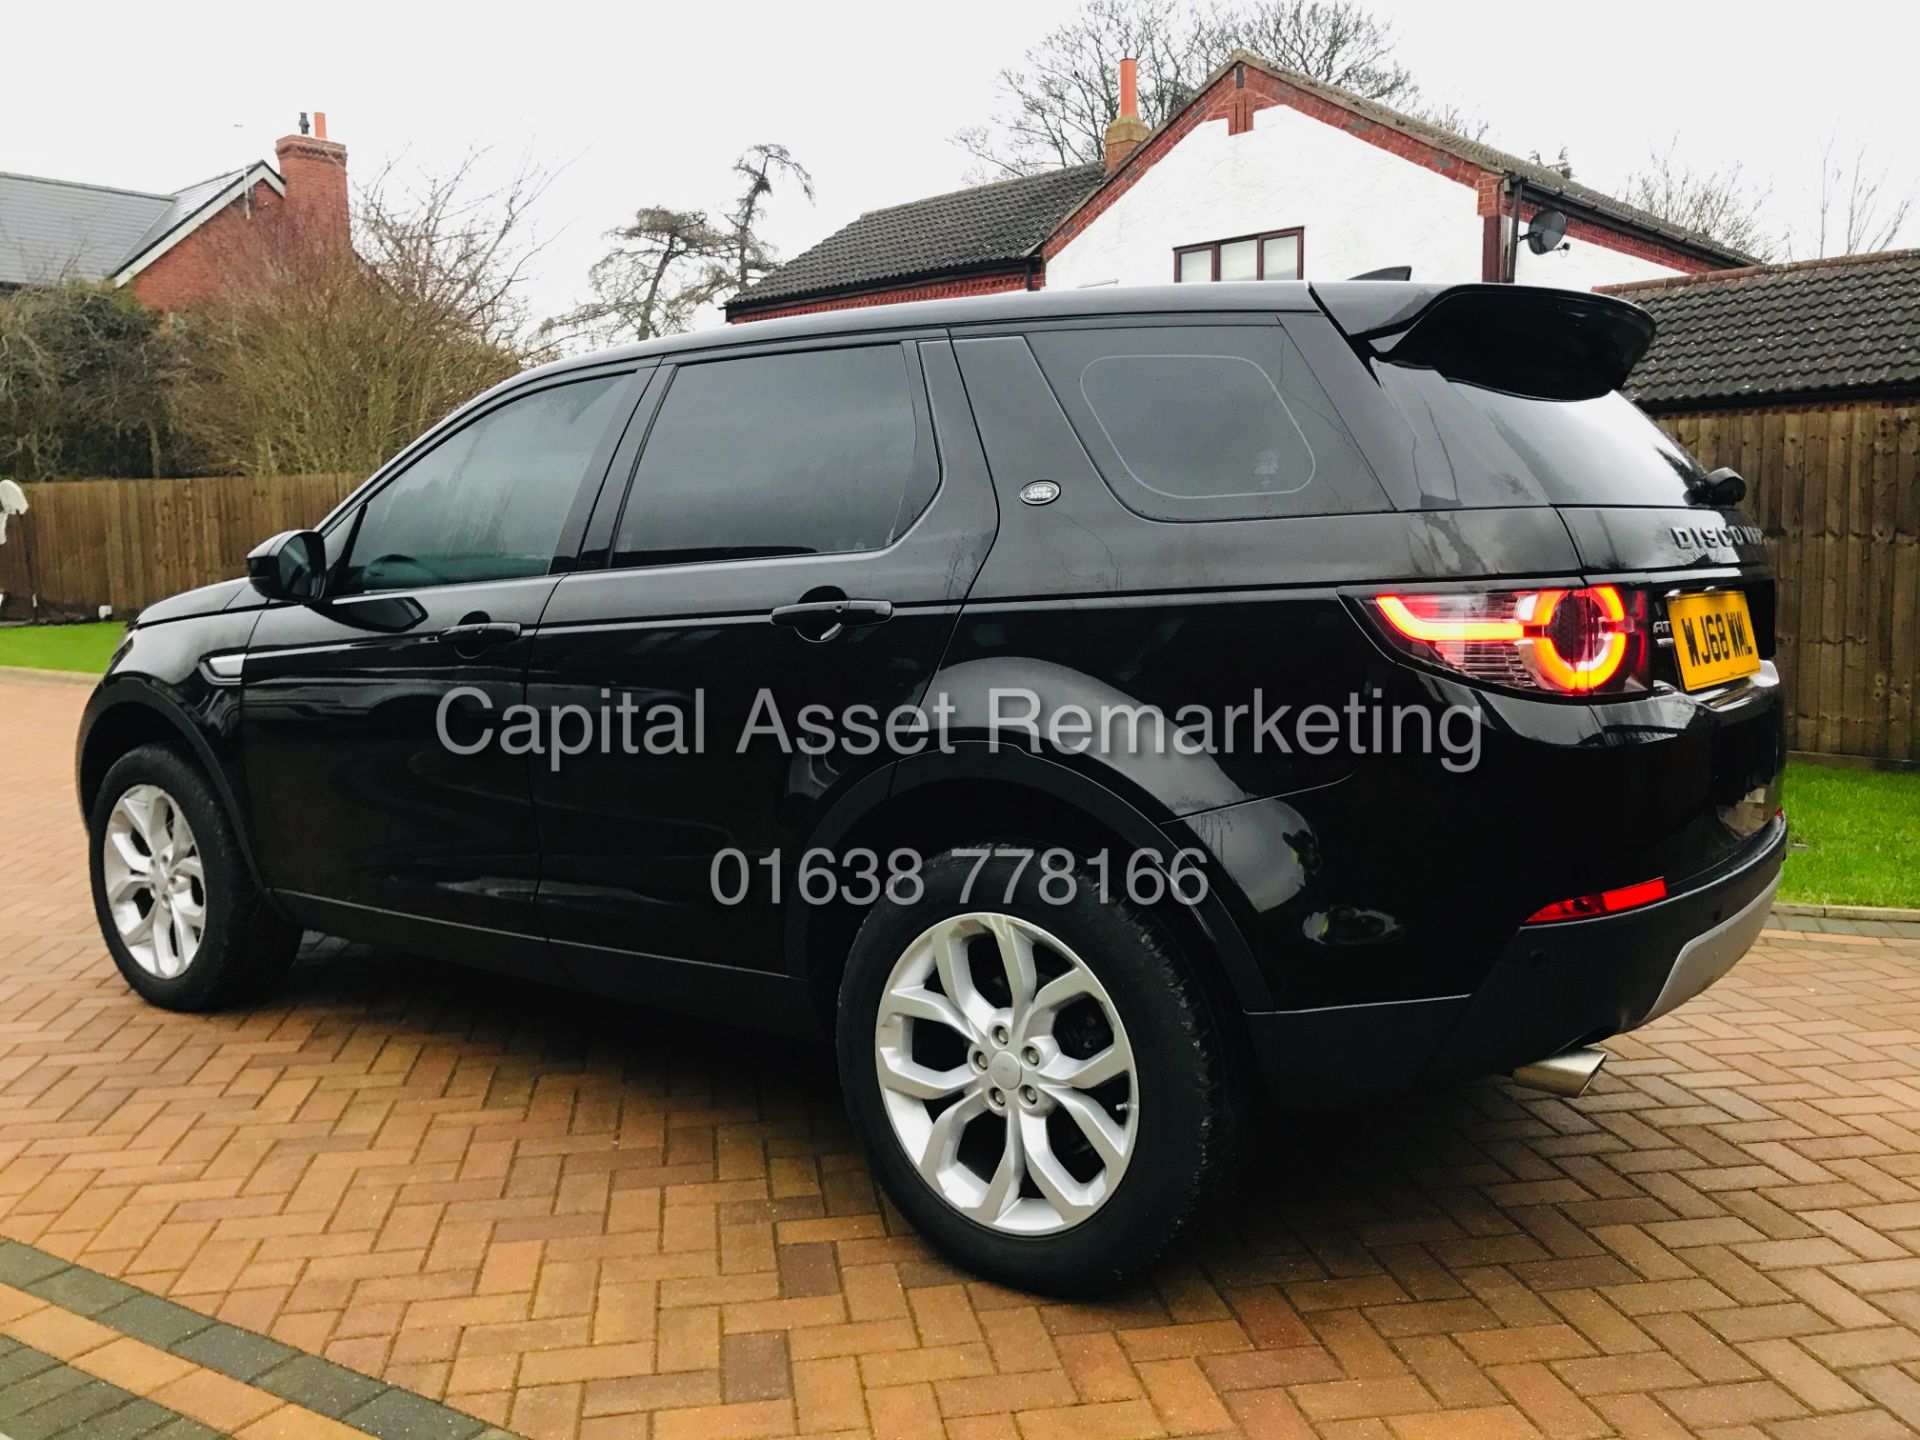 ON SALE LAND ROVER DISCOVERY SPORT "HSE" AUTO 7 SEATER (2019 MODEL) - SAT NAV -LEATHER *PAN ROOF* - Image 9 of 35